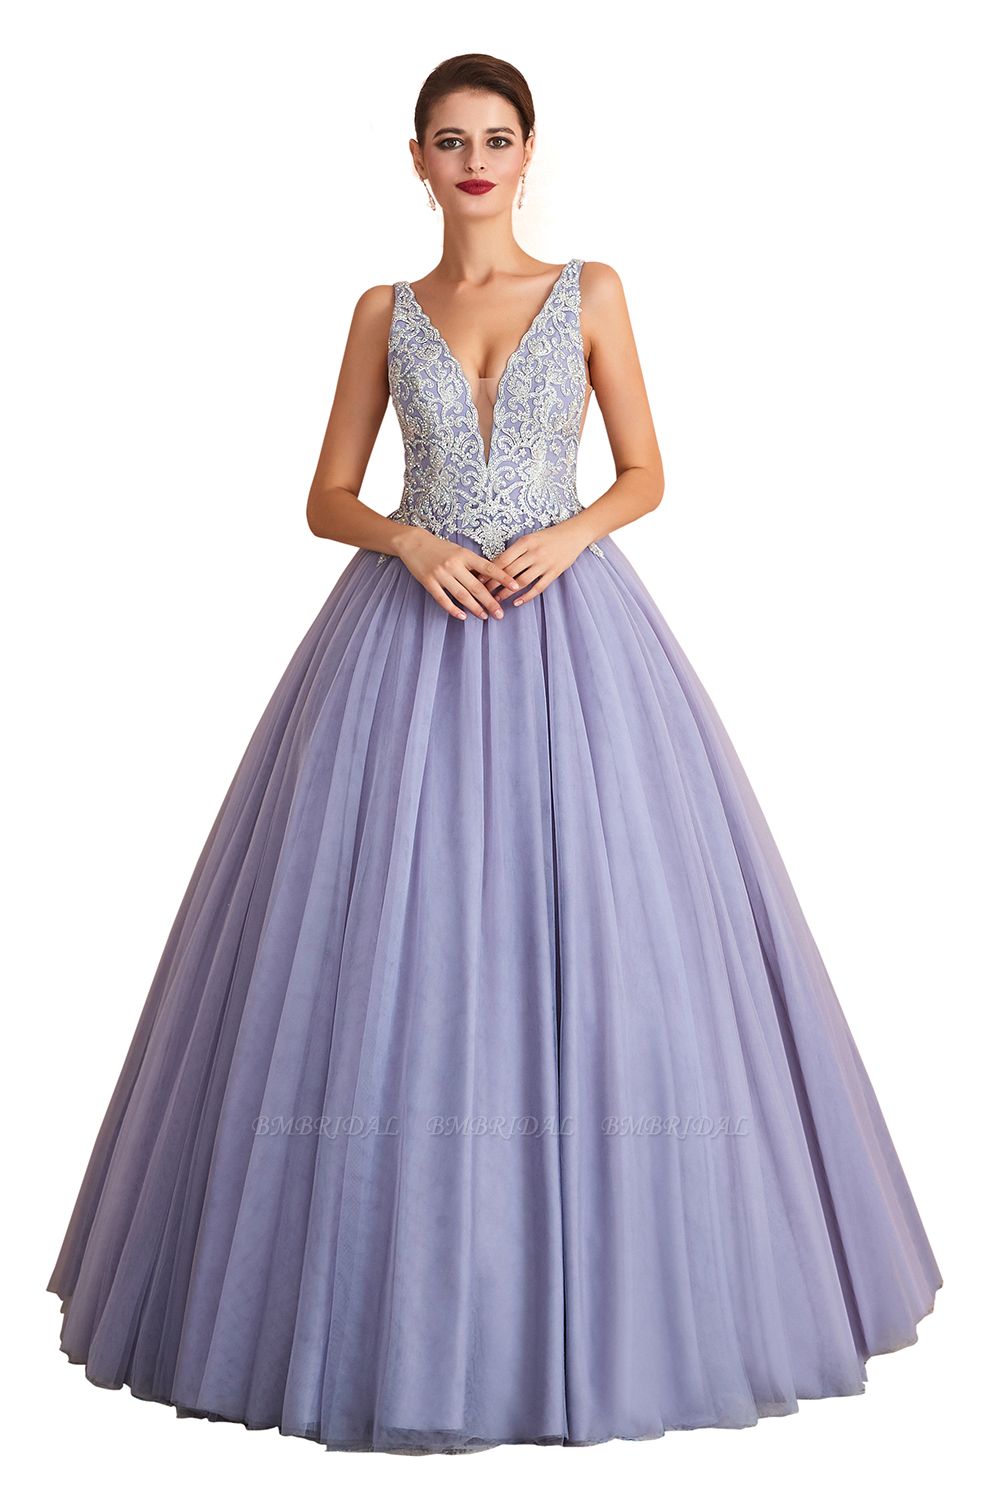 BMbridal Gorgeous Lavender Lace Prom Dress V-Neck Ball Gown Tulle Formal Wears